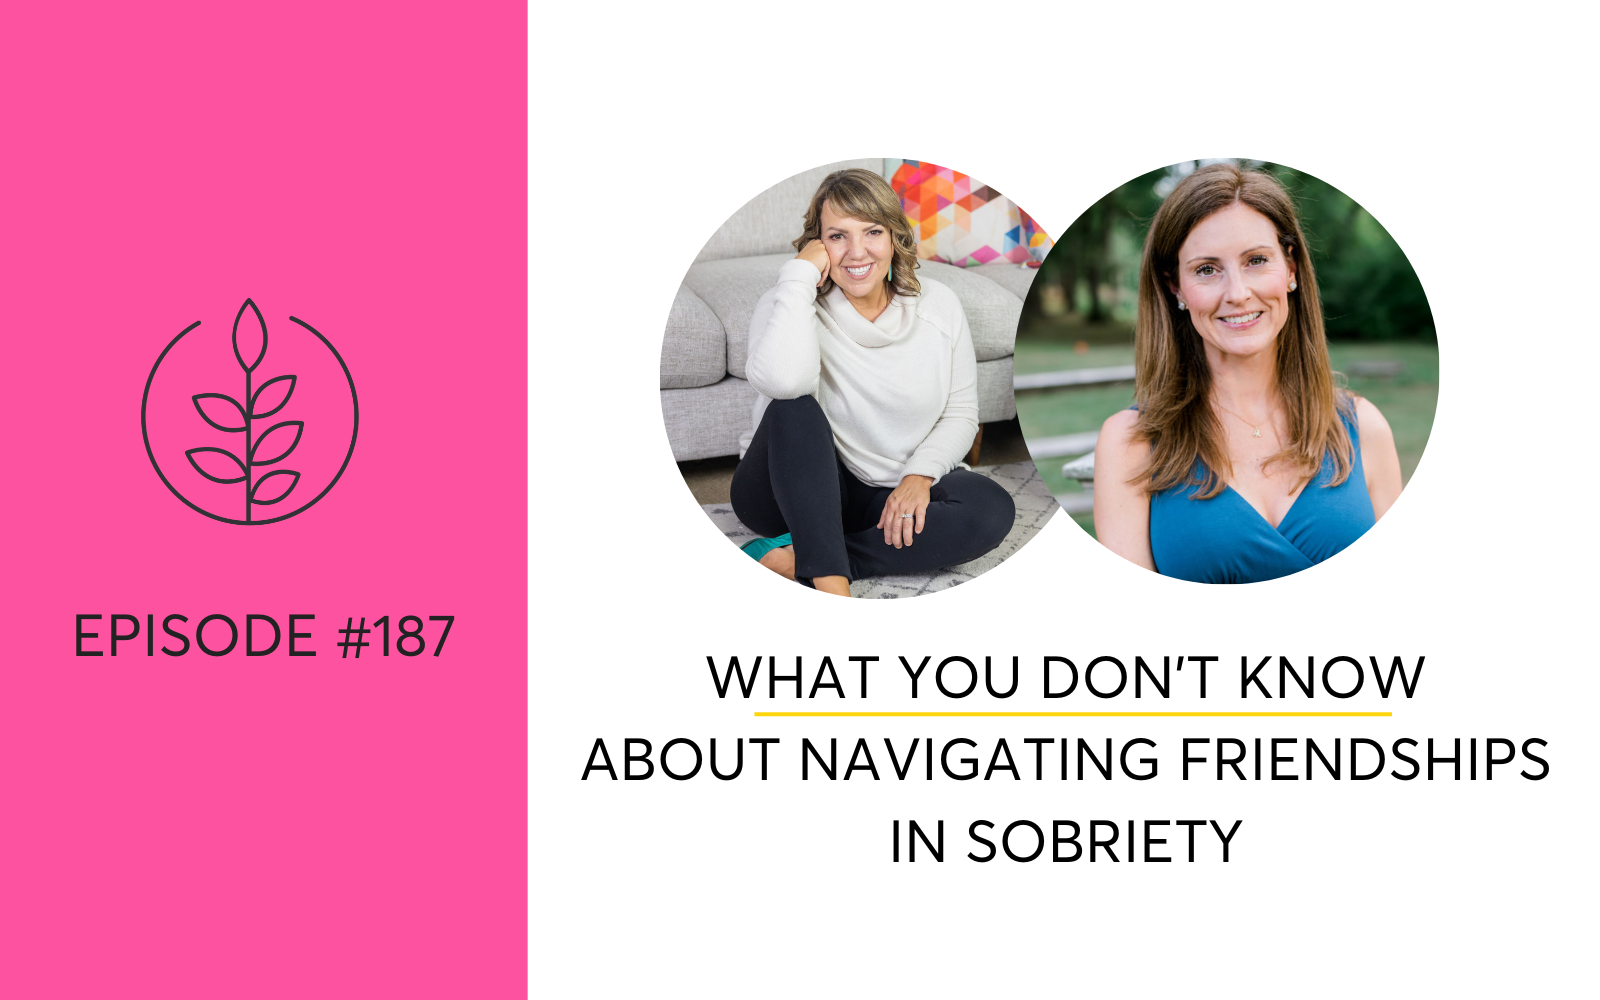 What You Don’t Know About Navigating Friendships In Sobriety